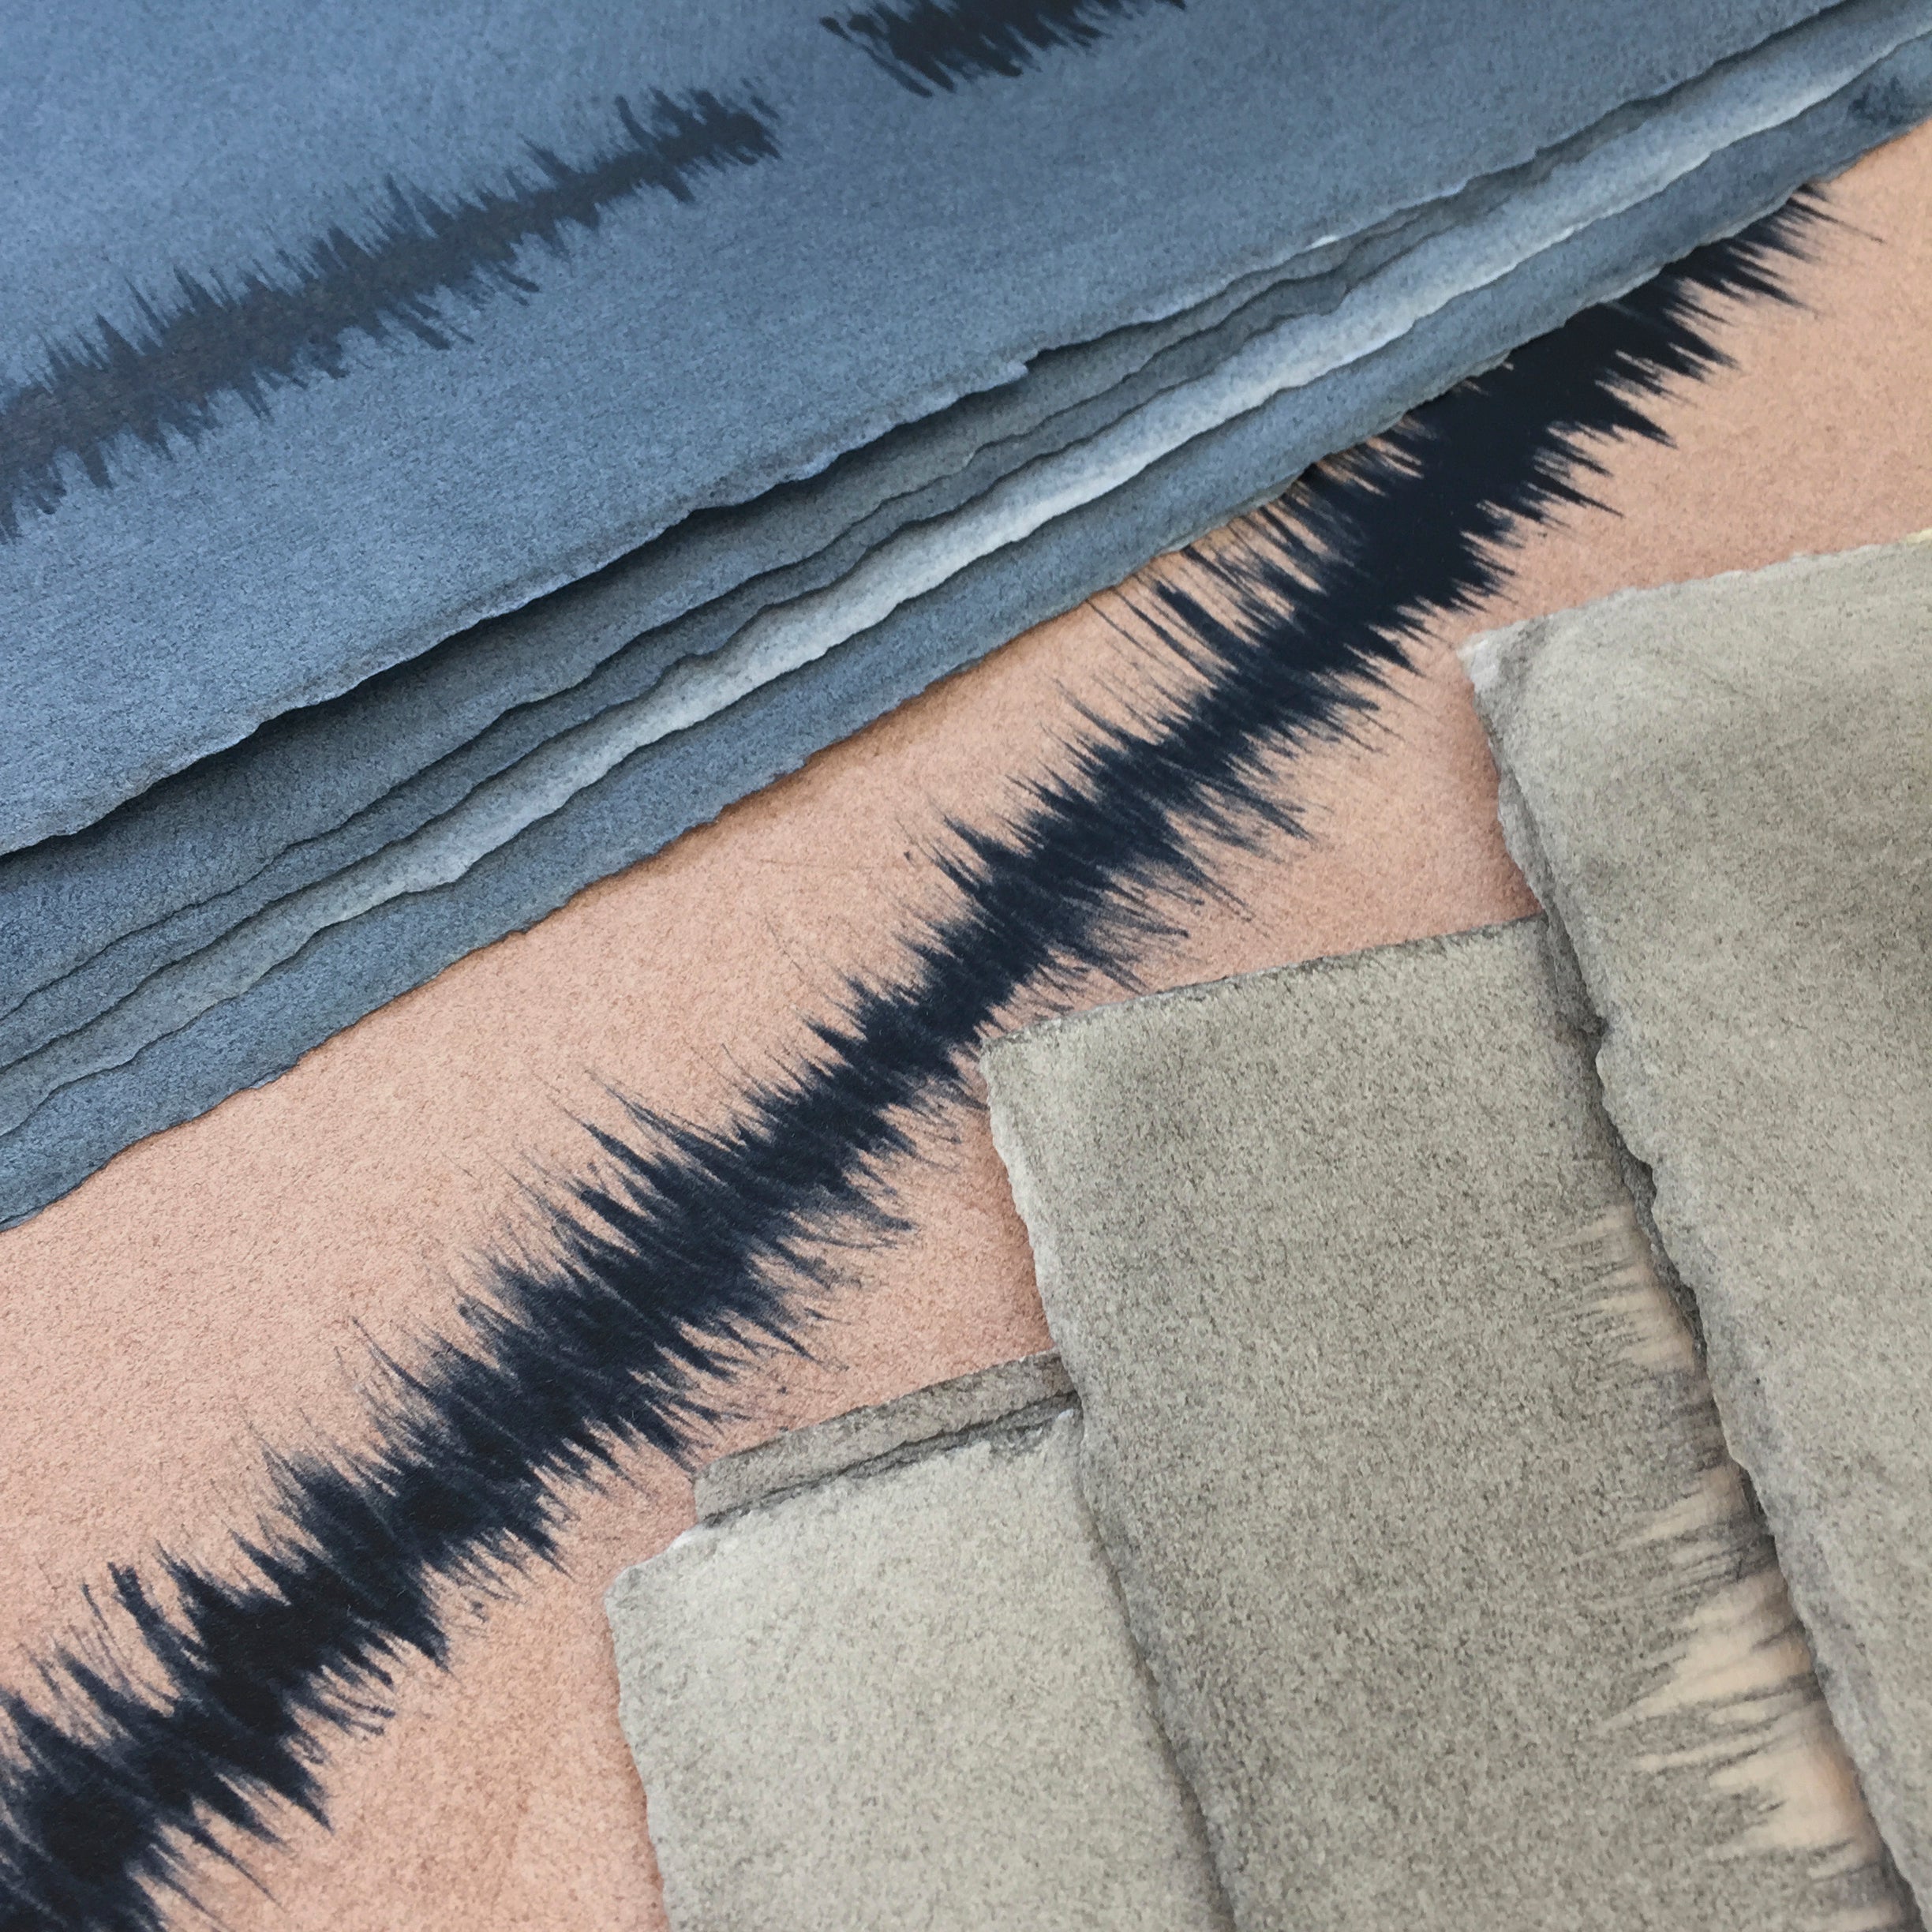 Pile of wallpaper swatches with irregular vibrating linear patterns in blue, tan and gray.